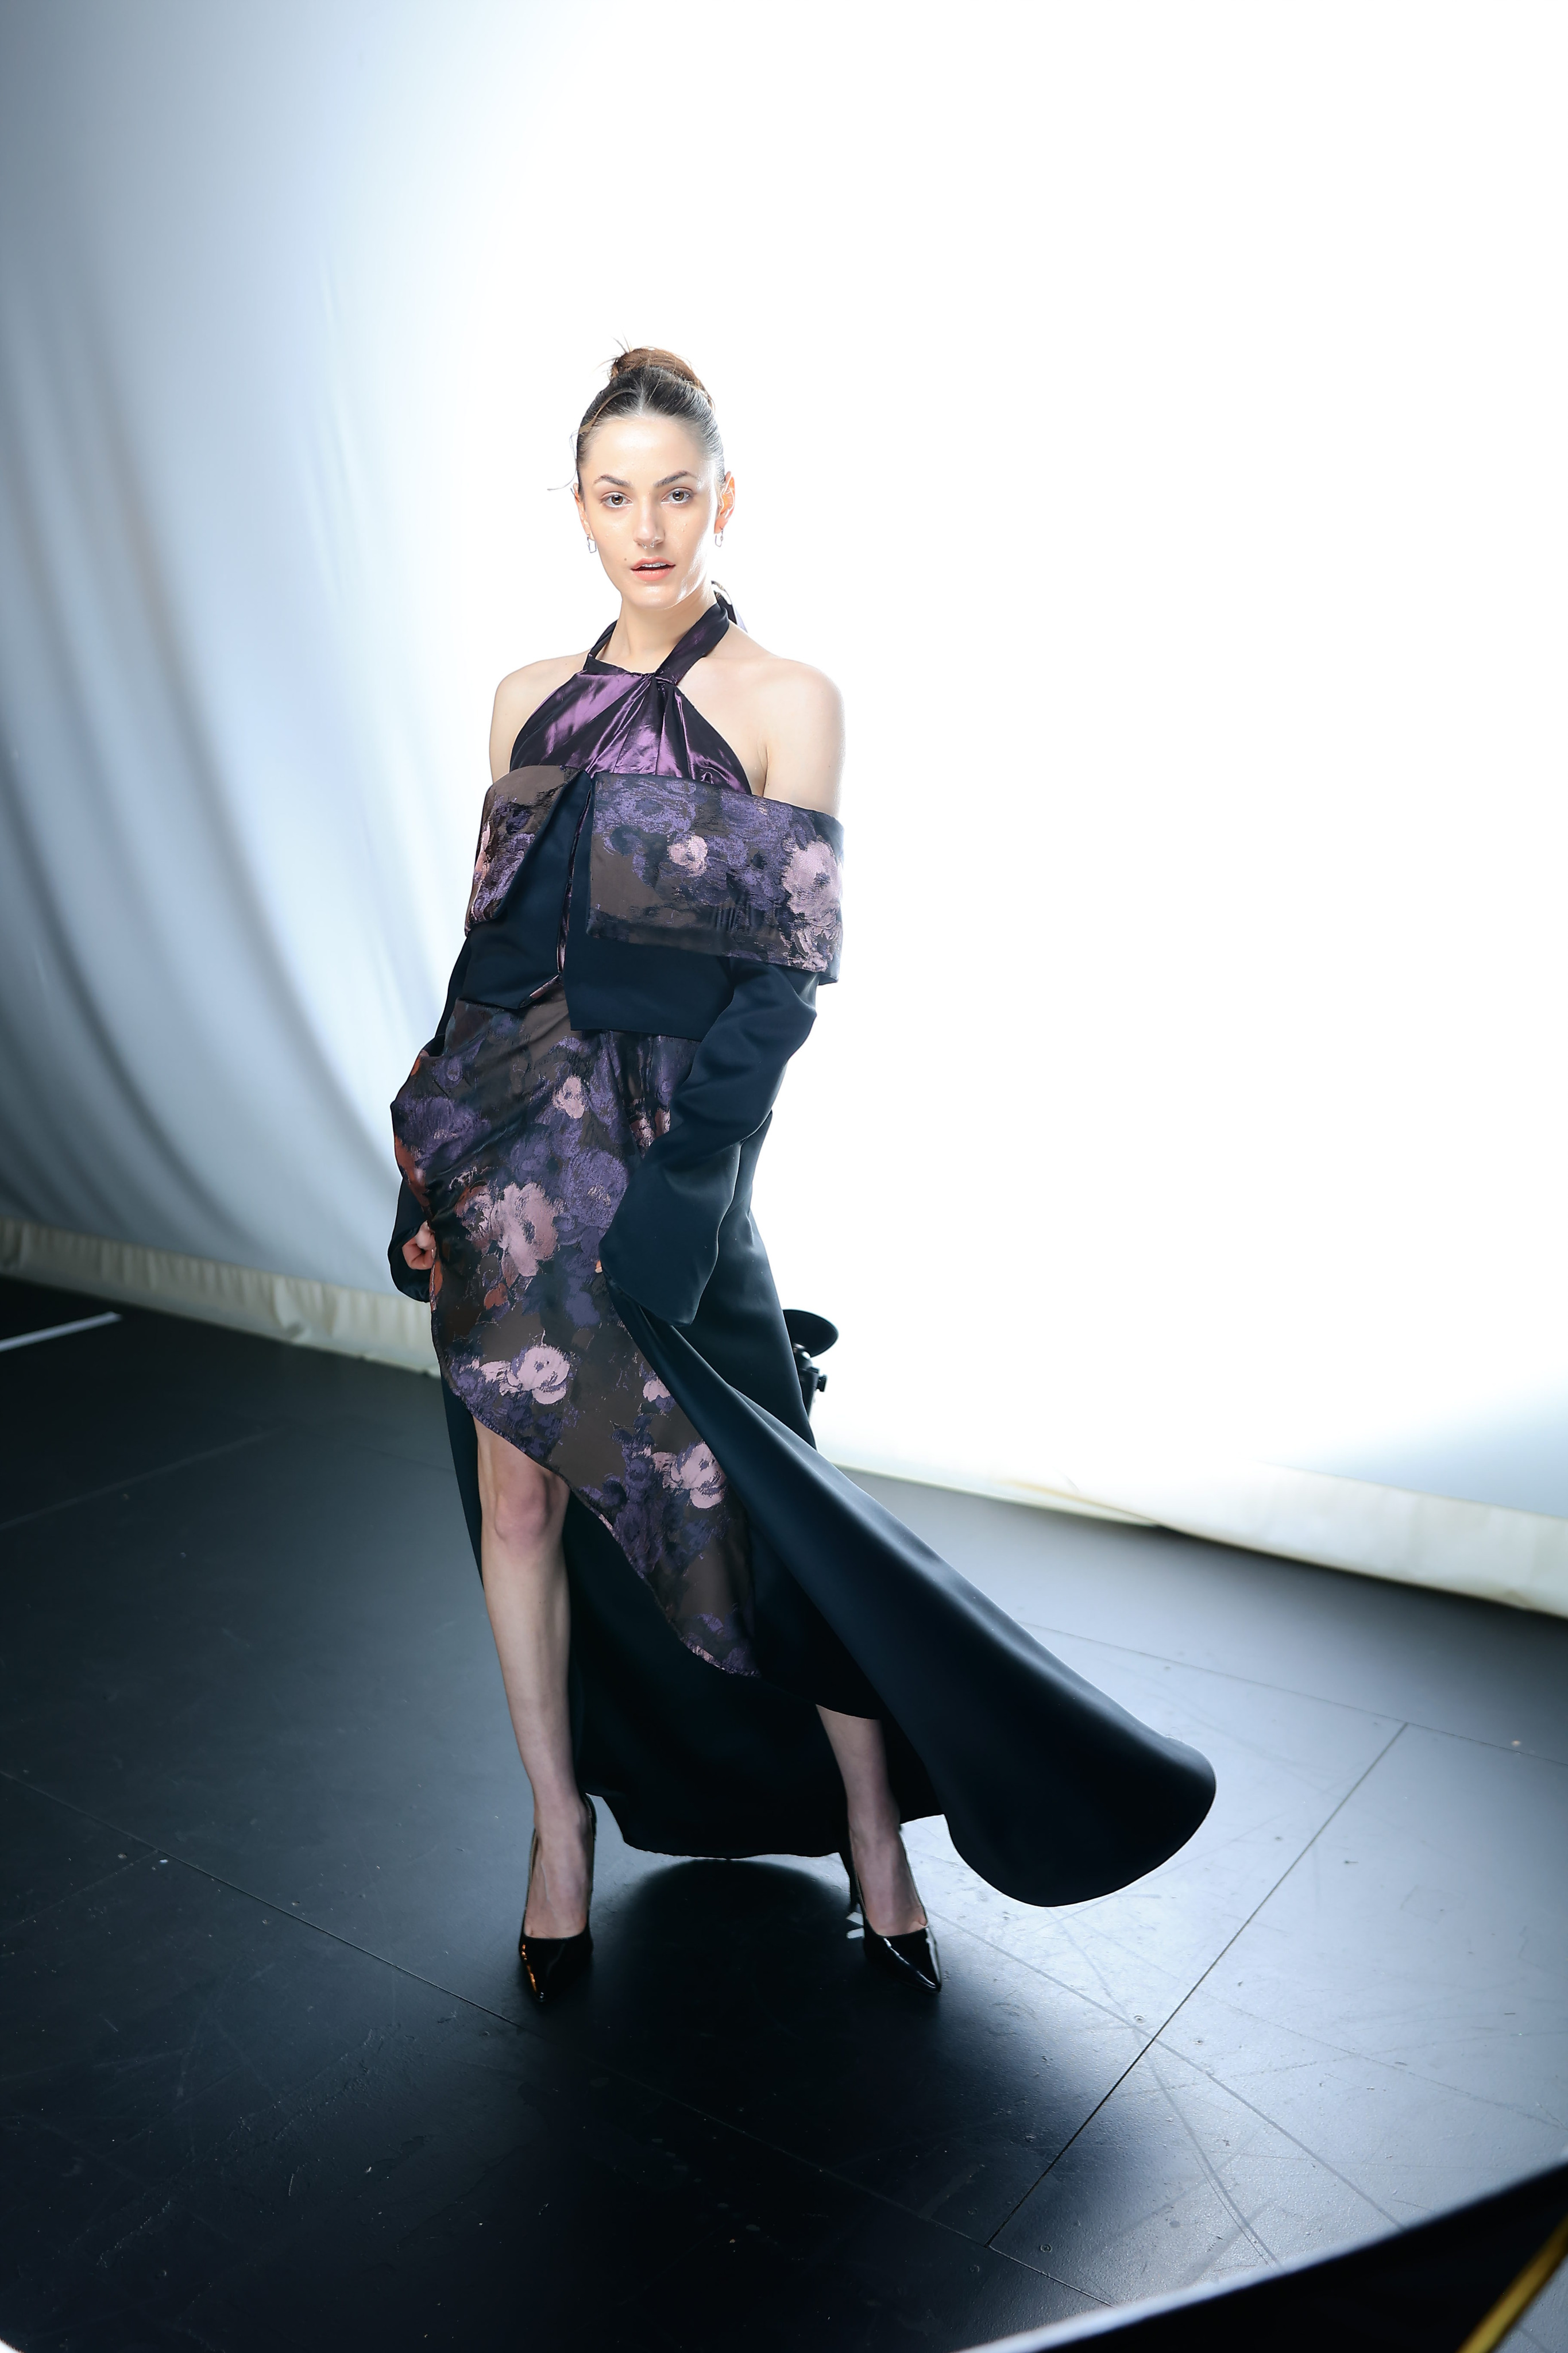 A model dress in a purple and black floral dress, posing for photos